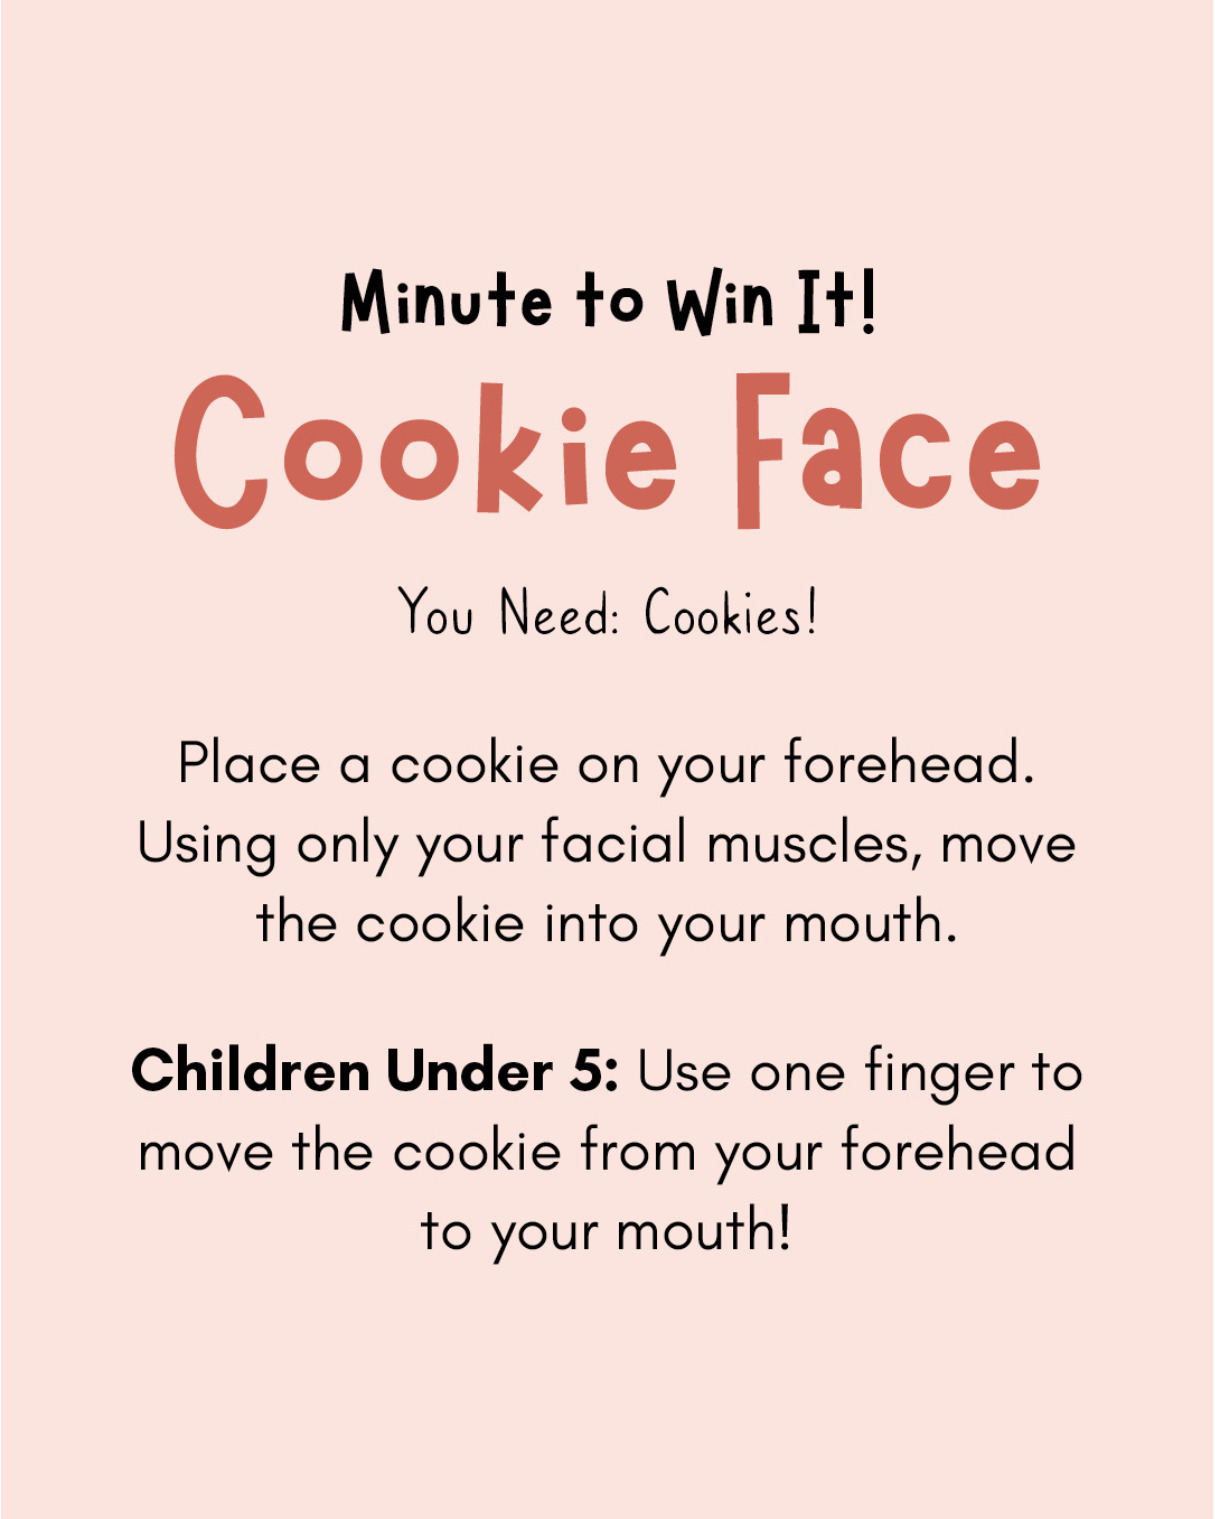 Minute to Win It Games for Families: Cookie Face